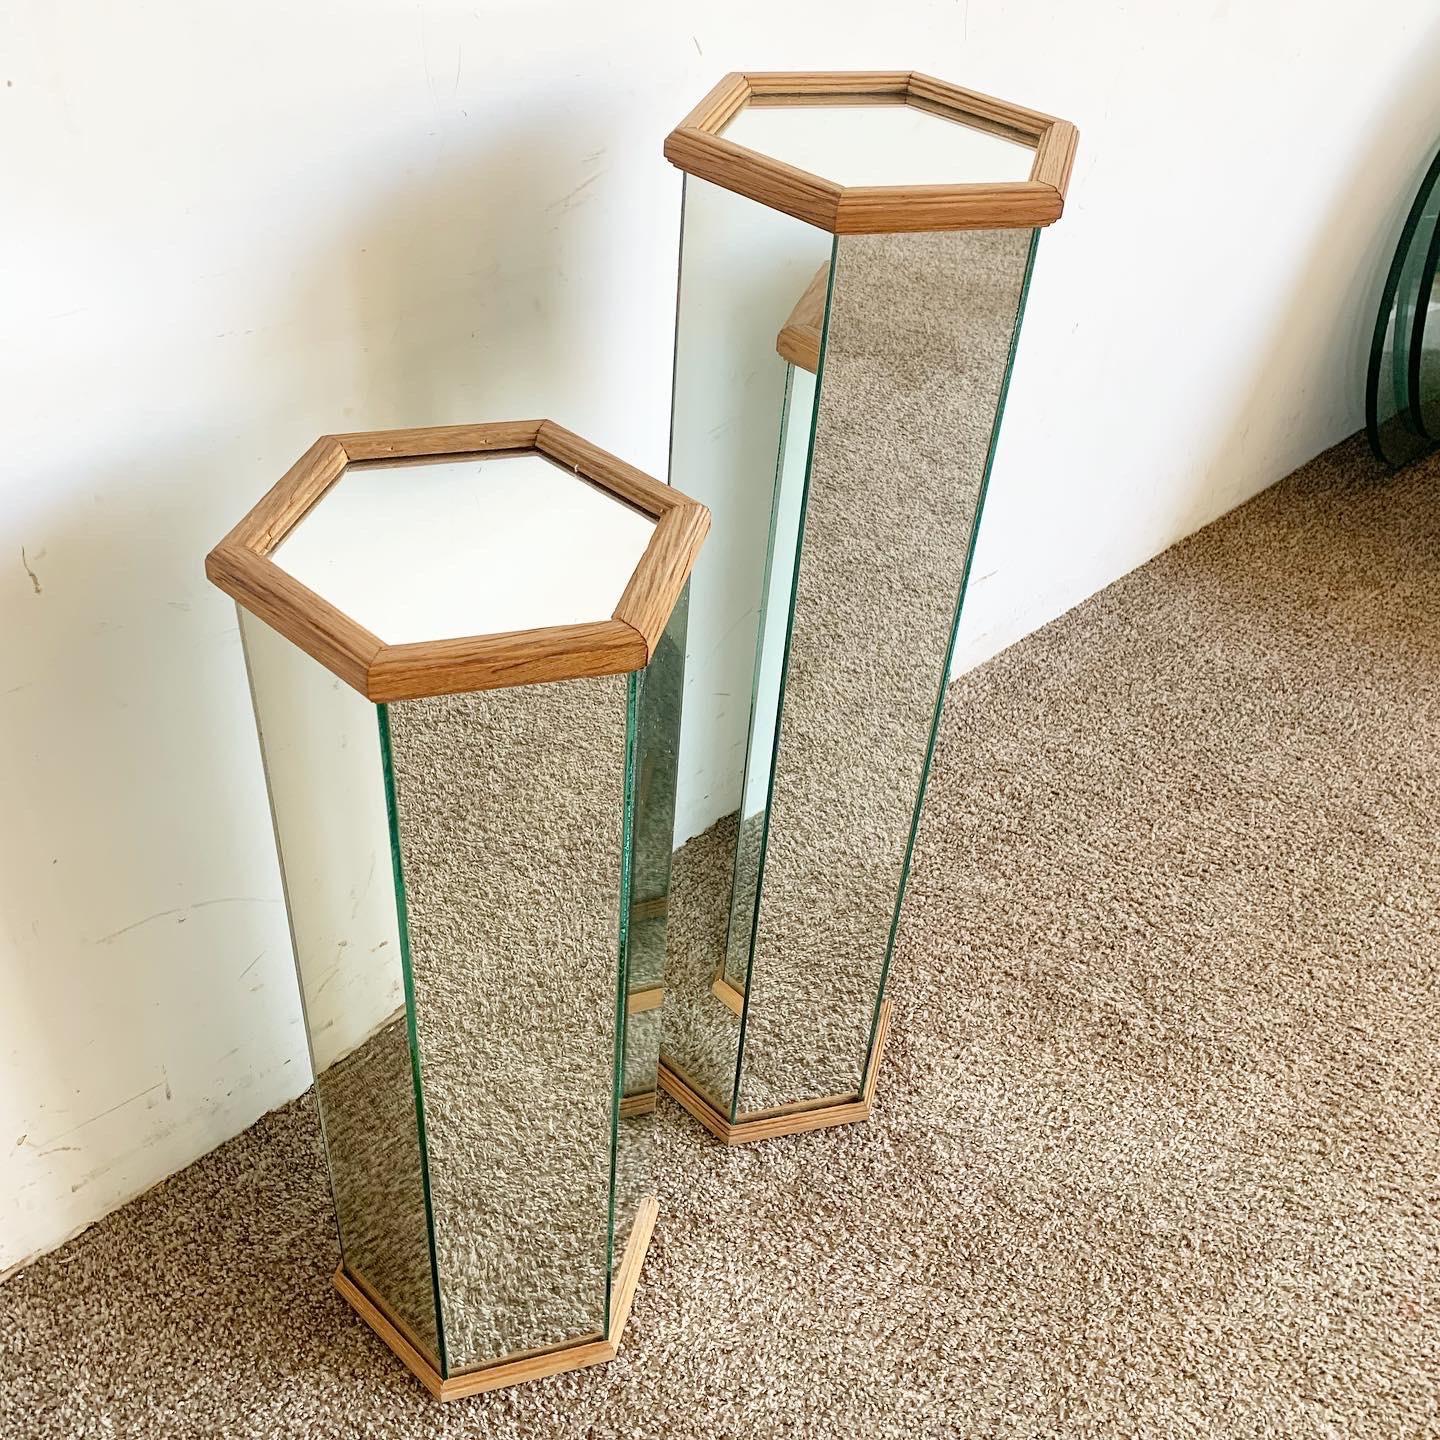 Add elegance and sophistication to your home with the Mirrored Hexagonal Wooden Tables, a postmodern pair that artfully combines contemporary design, mirrored aesthetics, and functional utility.

Striking hexagonal design with mirrored panels for